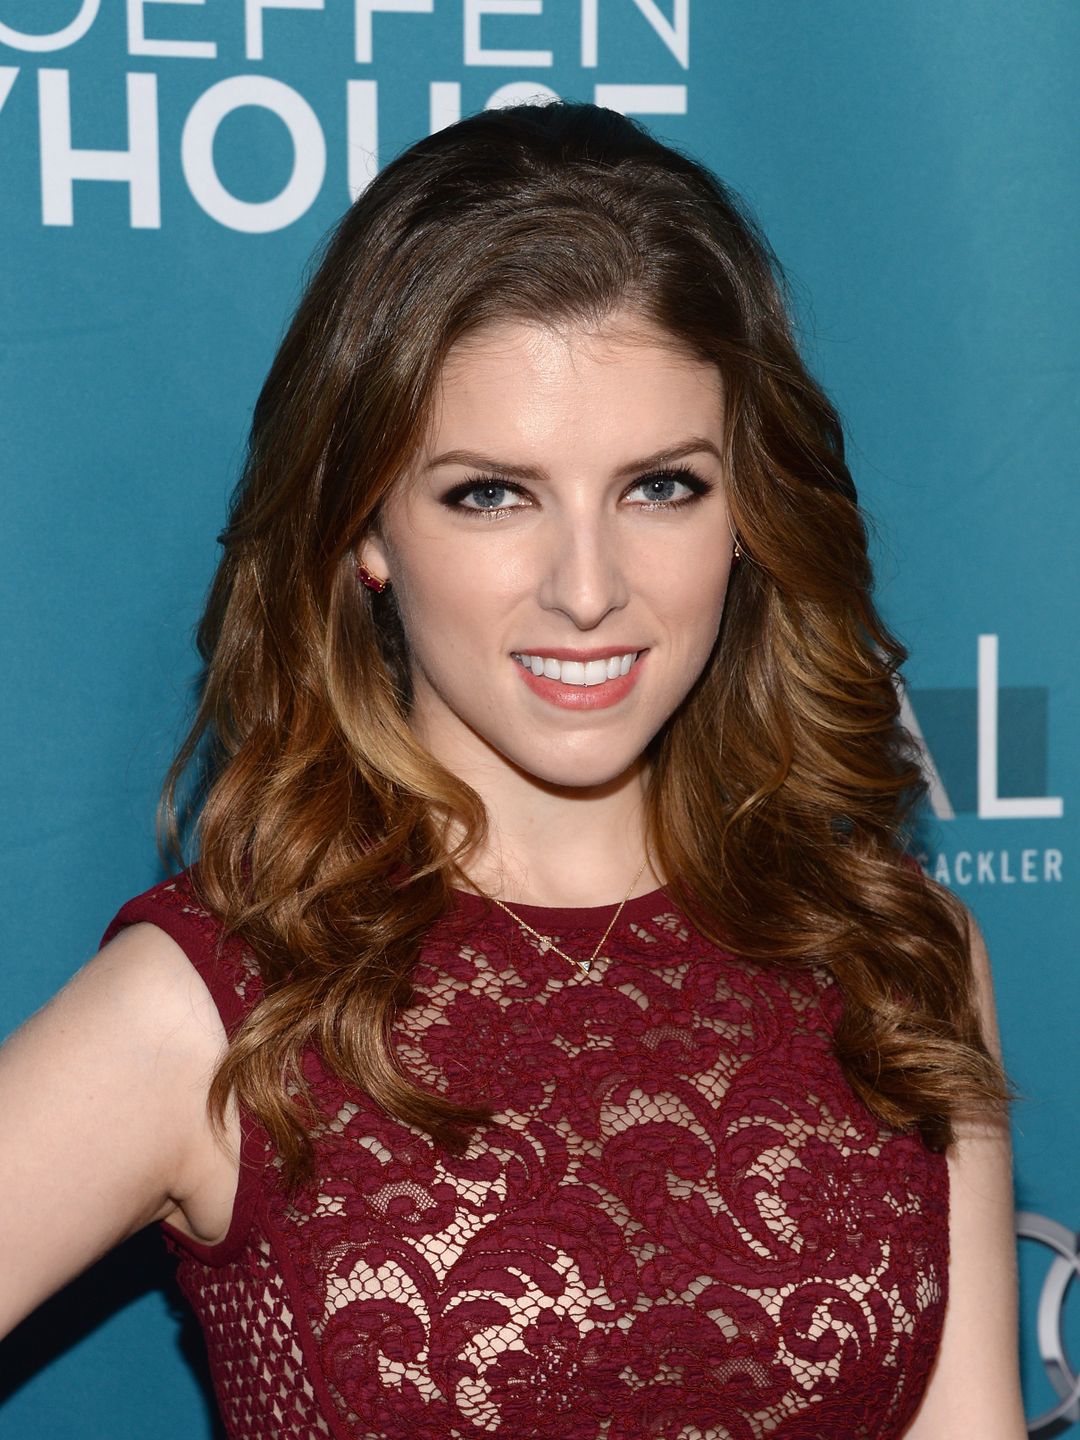 Anna Kendrick does she have kids